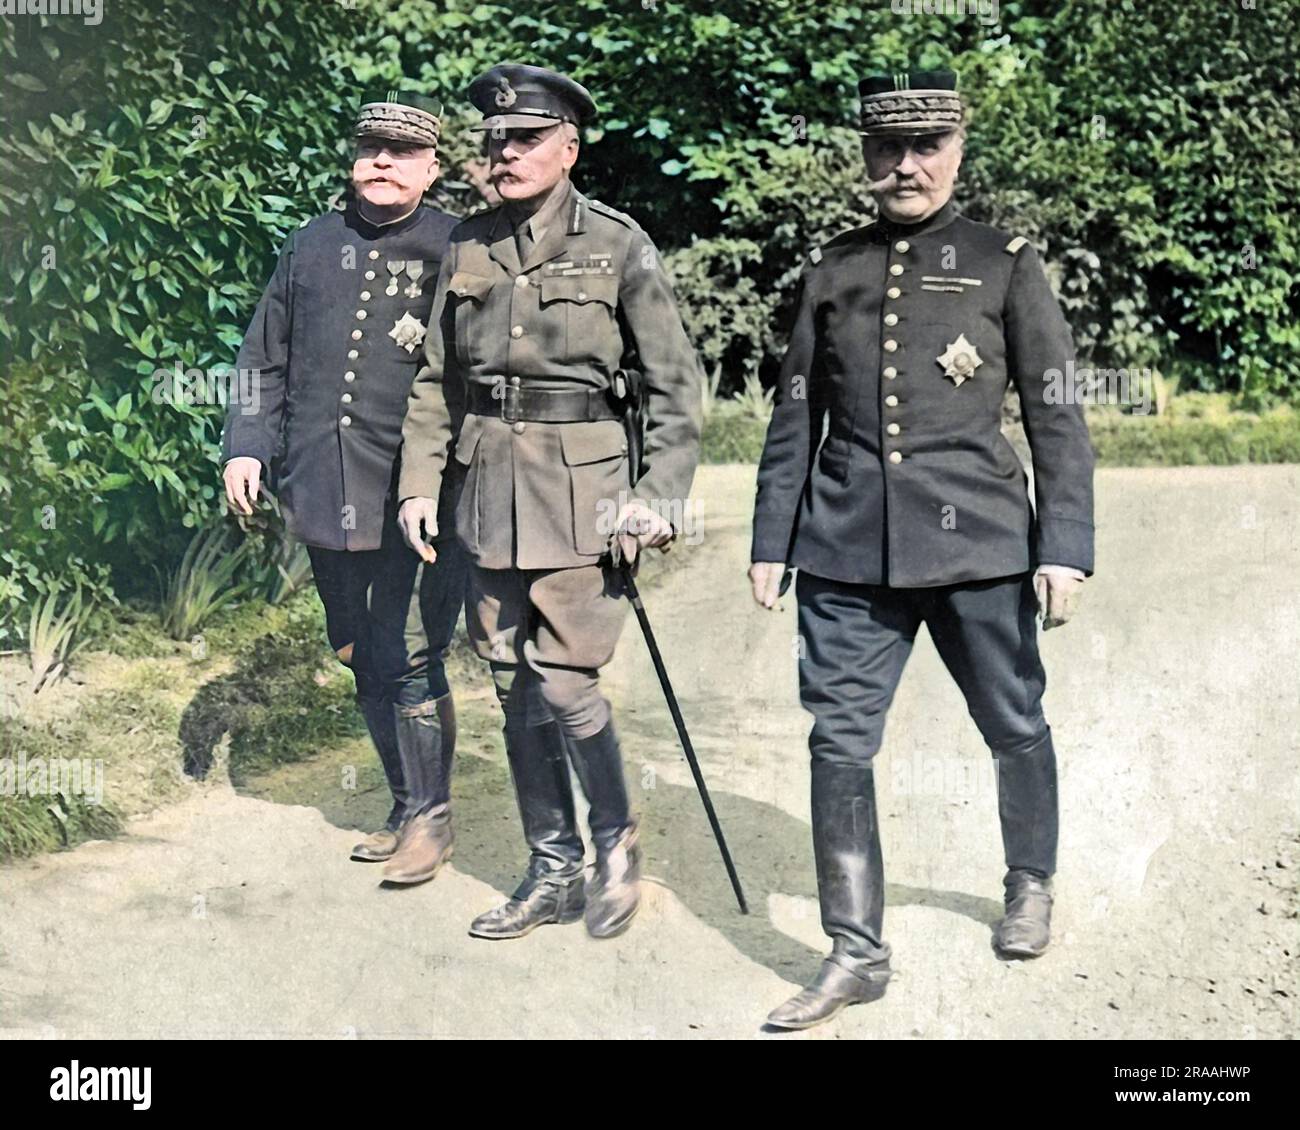 Sir Douglas Haig with French Generals Joffre and Foch, probably at Beauquesne, France, in August 1916 during a visit from King George V, World War One.     Date: circa 1916 Stock Photo